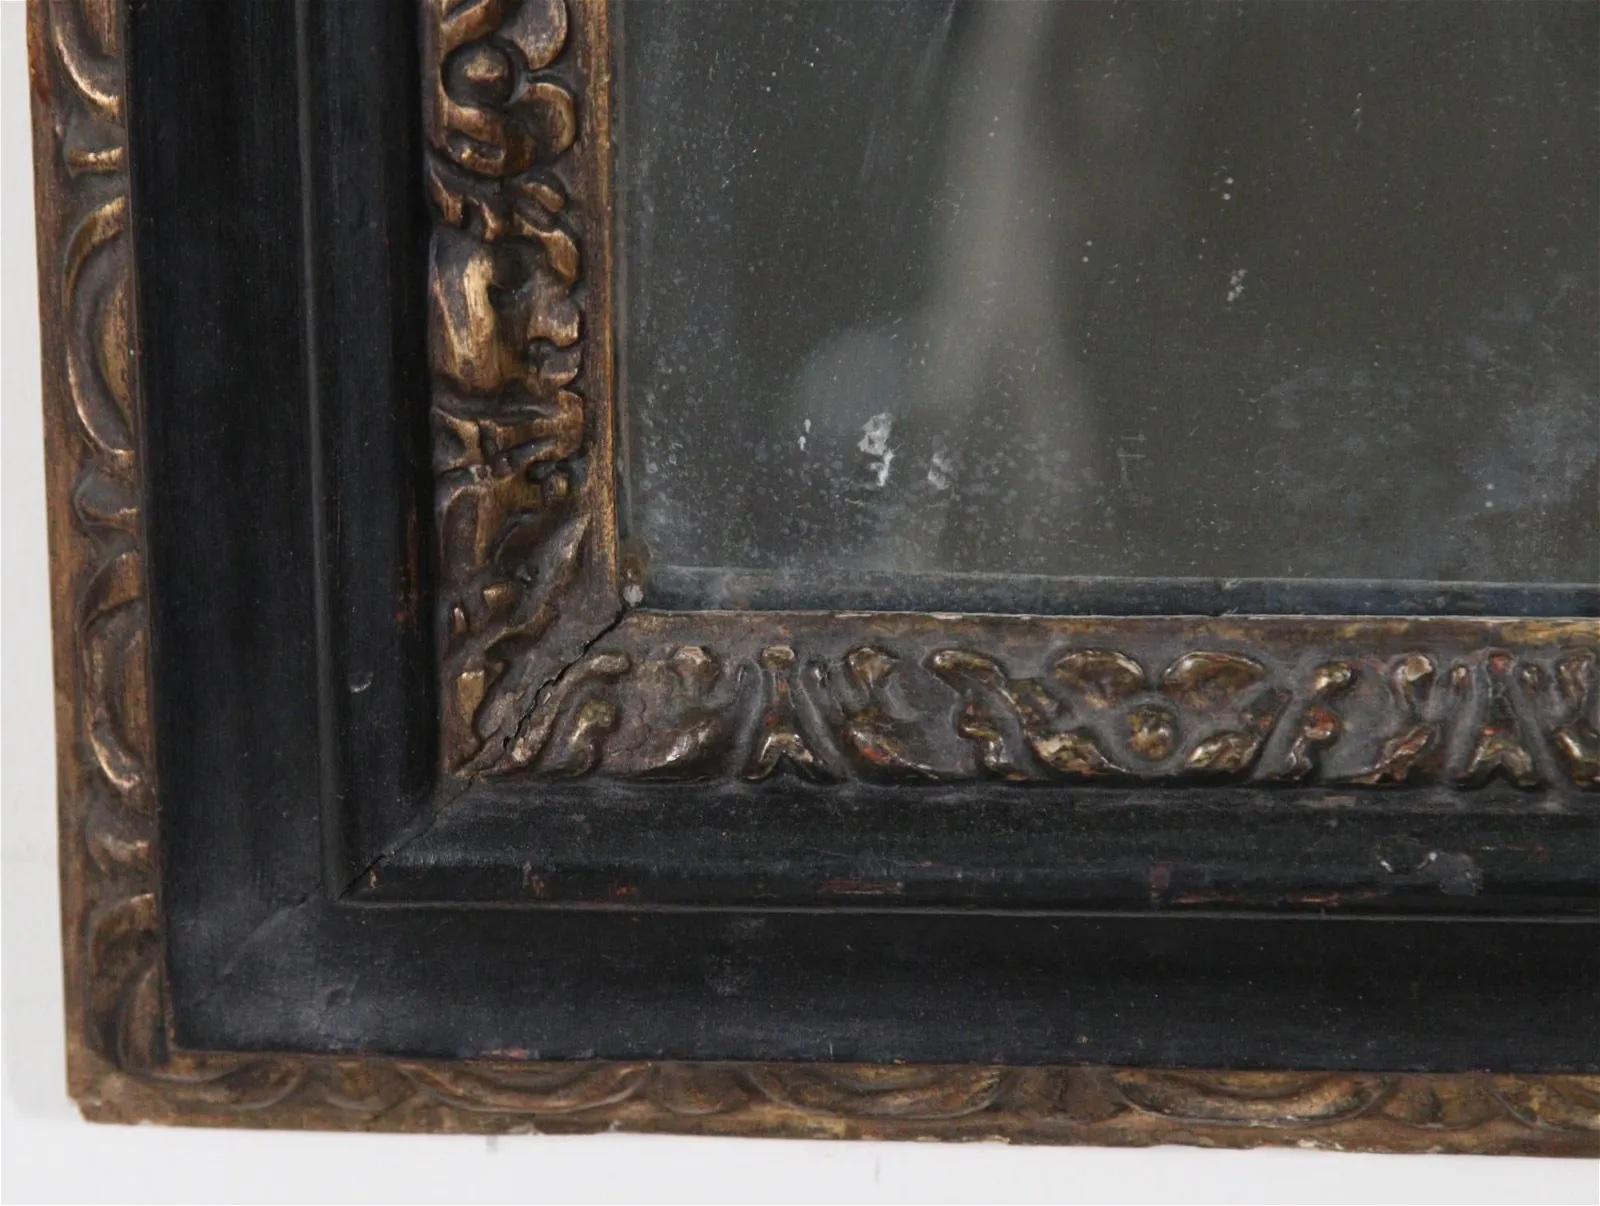 18th Century Baroque Mirror with black frame. The elegant frame is embellished inside with gilded acanthus leaf carving and outside with gilded egg and dart pattern carving. It is adorned with beautifully carved and gilt adornment on sides and top.